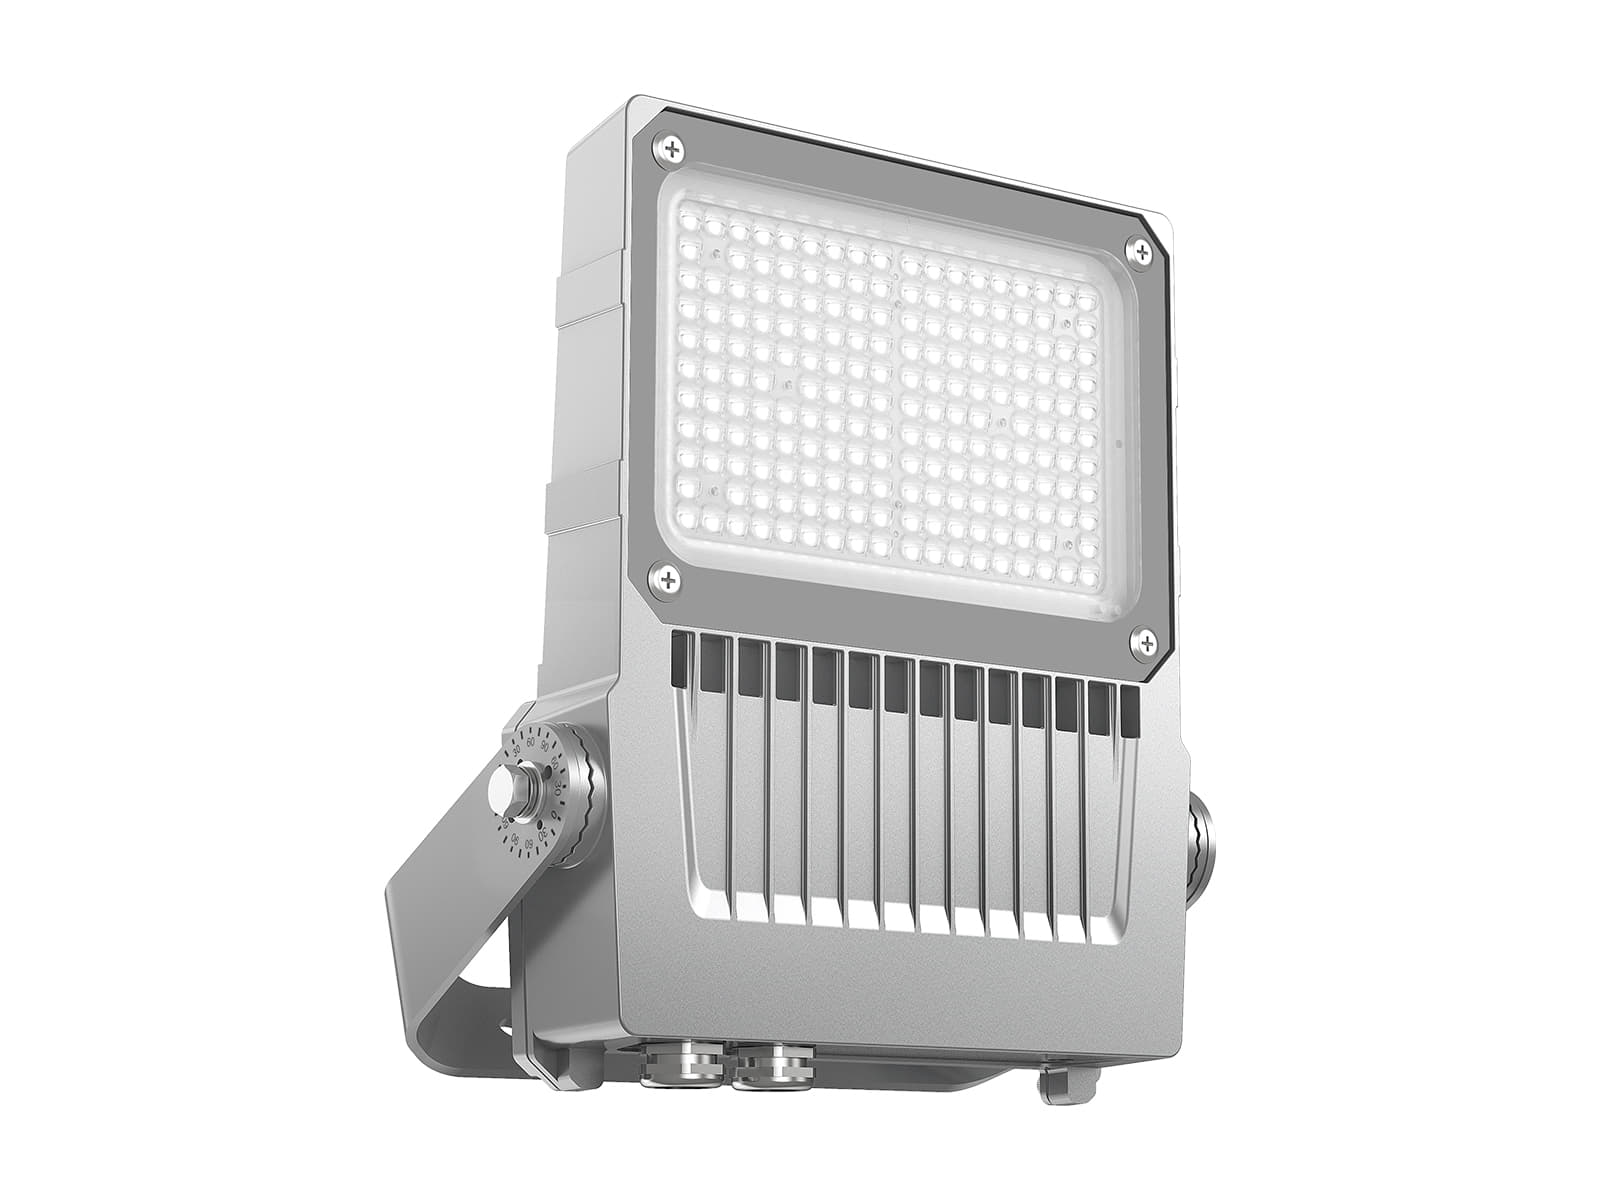 Dreamlux LED Module Flood Lamp C Price Starting From Rs 20/Pc. Find  Verified Sellers in Agra - JdMart